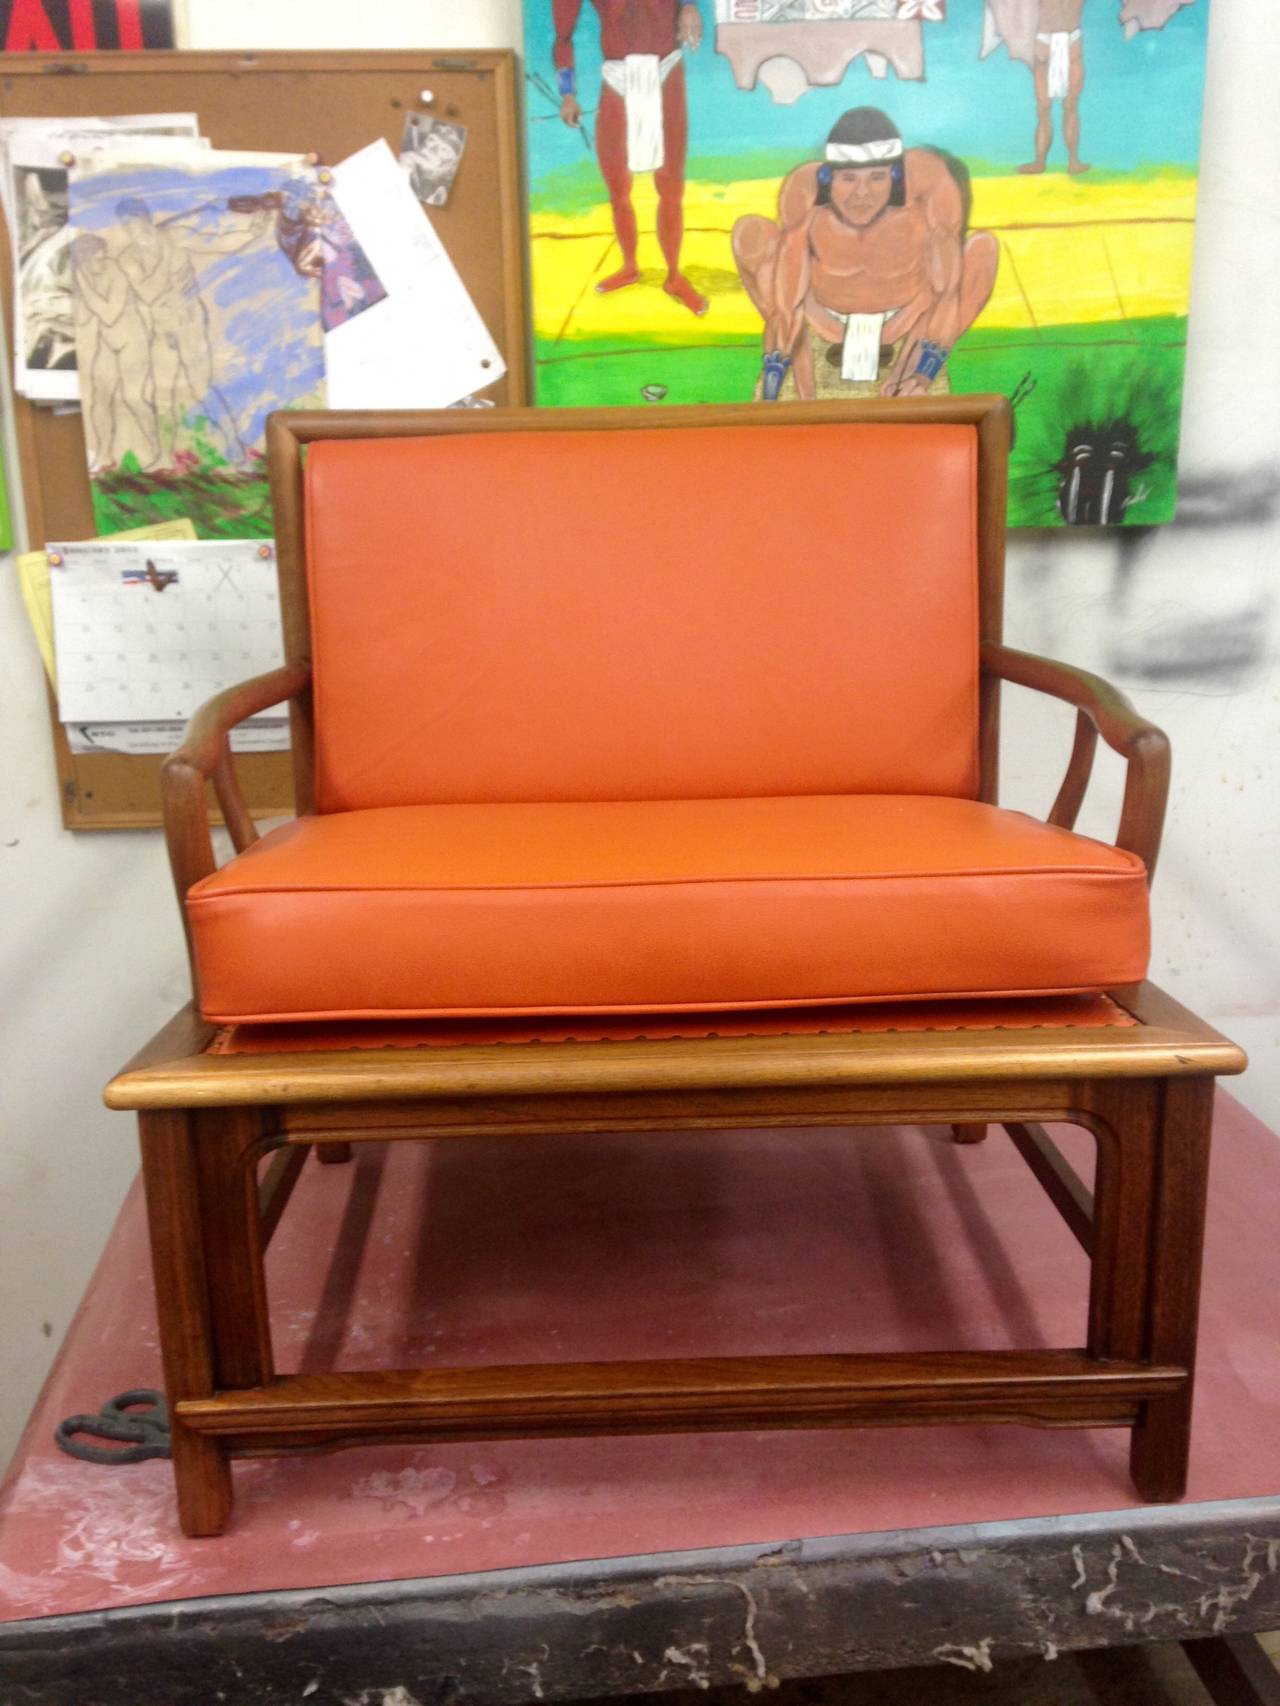 A great looking pair of Asian Modern style chairs that were made by Widdicomb. They had Widdicomb sprinted on the webbing, which has been completely redone and these chairs have been re-upholstered in a great orange leather.
Nice styling and finish